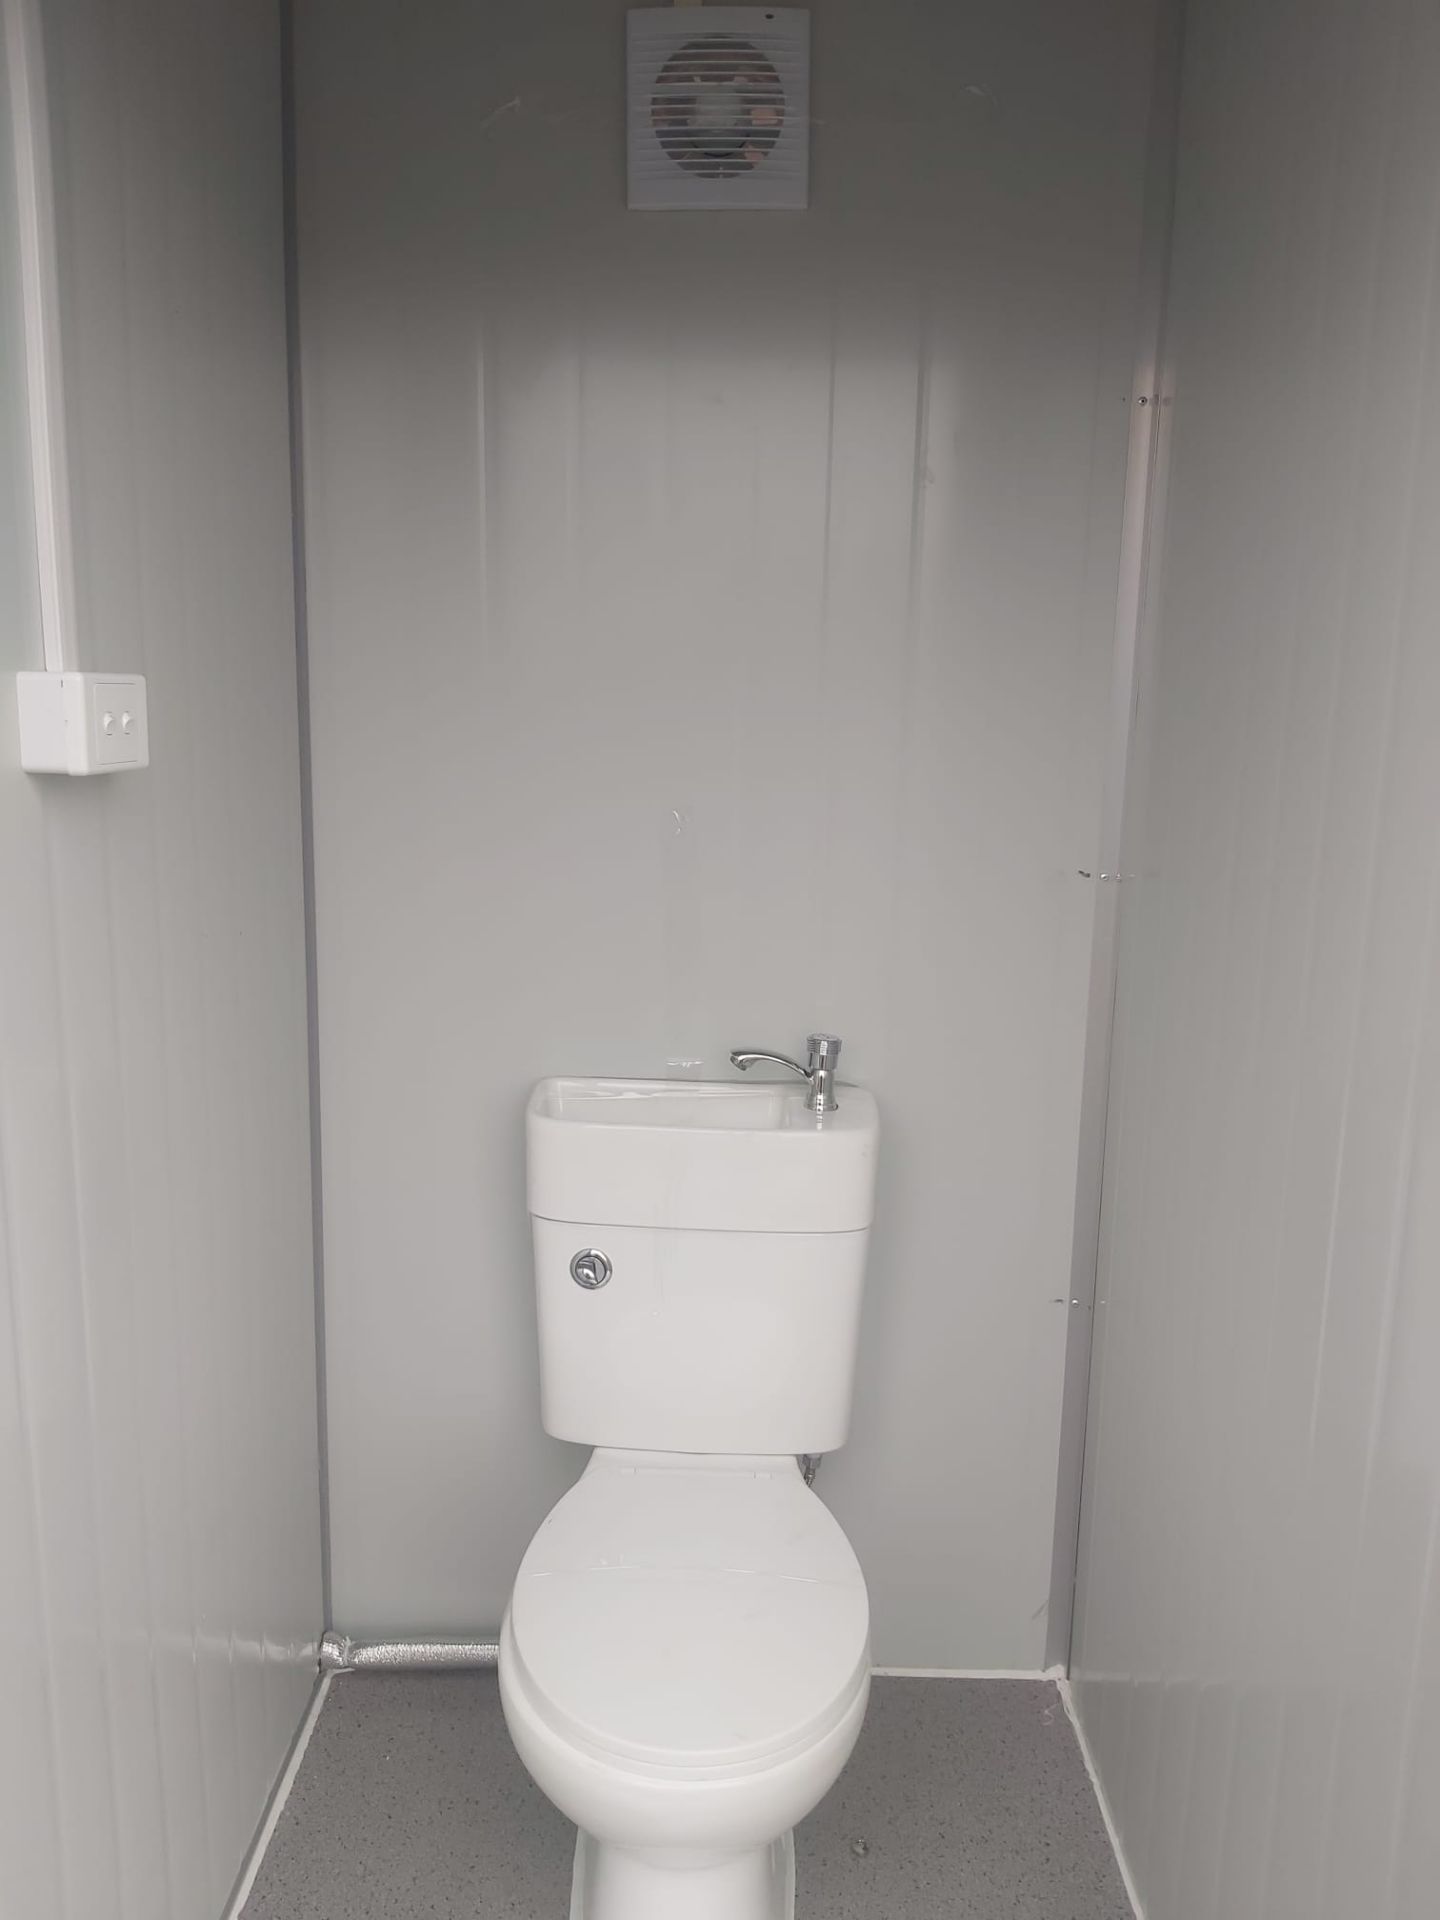 Double Toilet Block 7ft x 4ft Separate WC with basins - Image 5 of 7